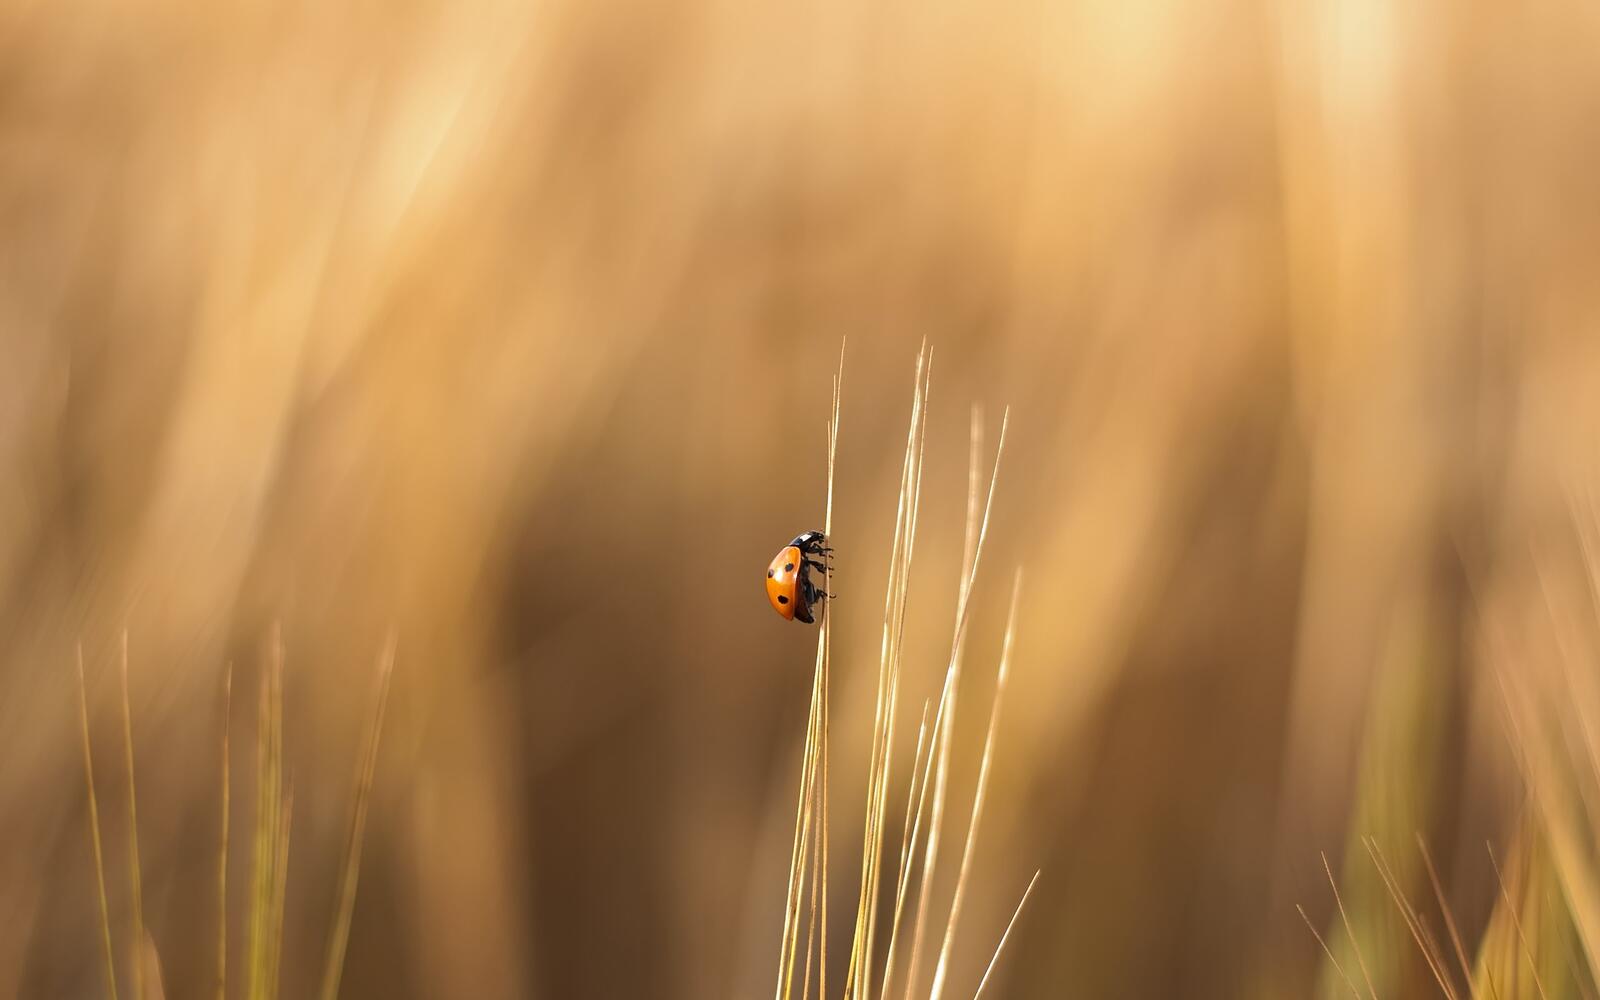 Wallpapers ladybug blade of grass field on the desktop